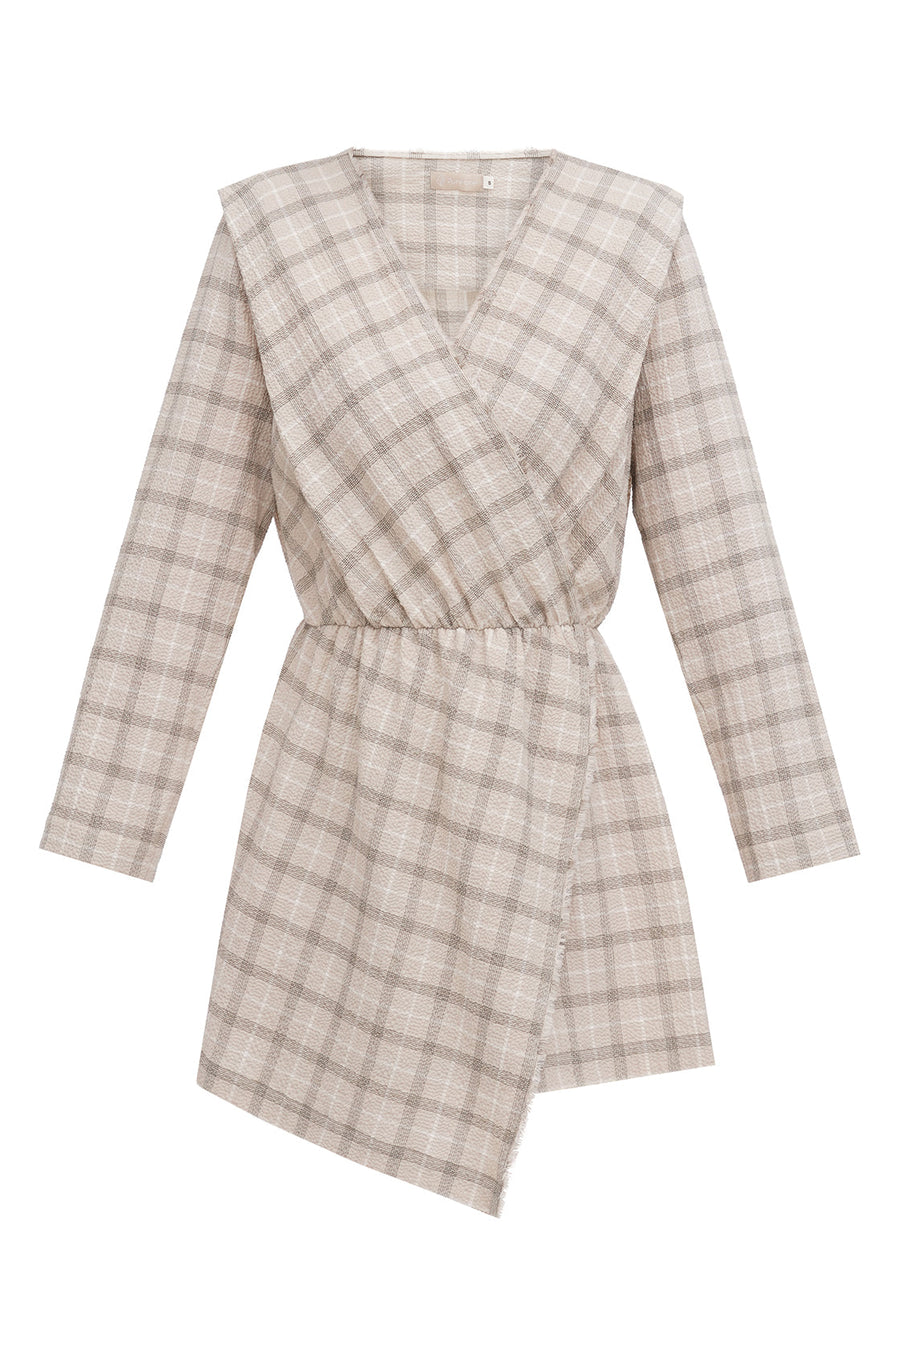 A Model Wearing Beige Organic Cotton Organic check wrinkled dress, curated by Only Ethikal